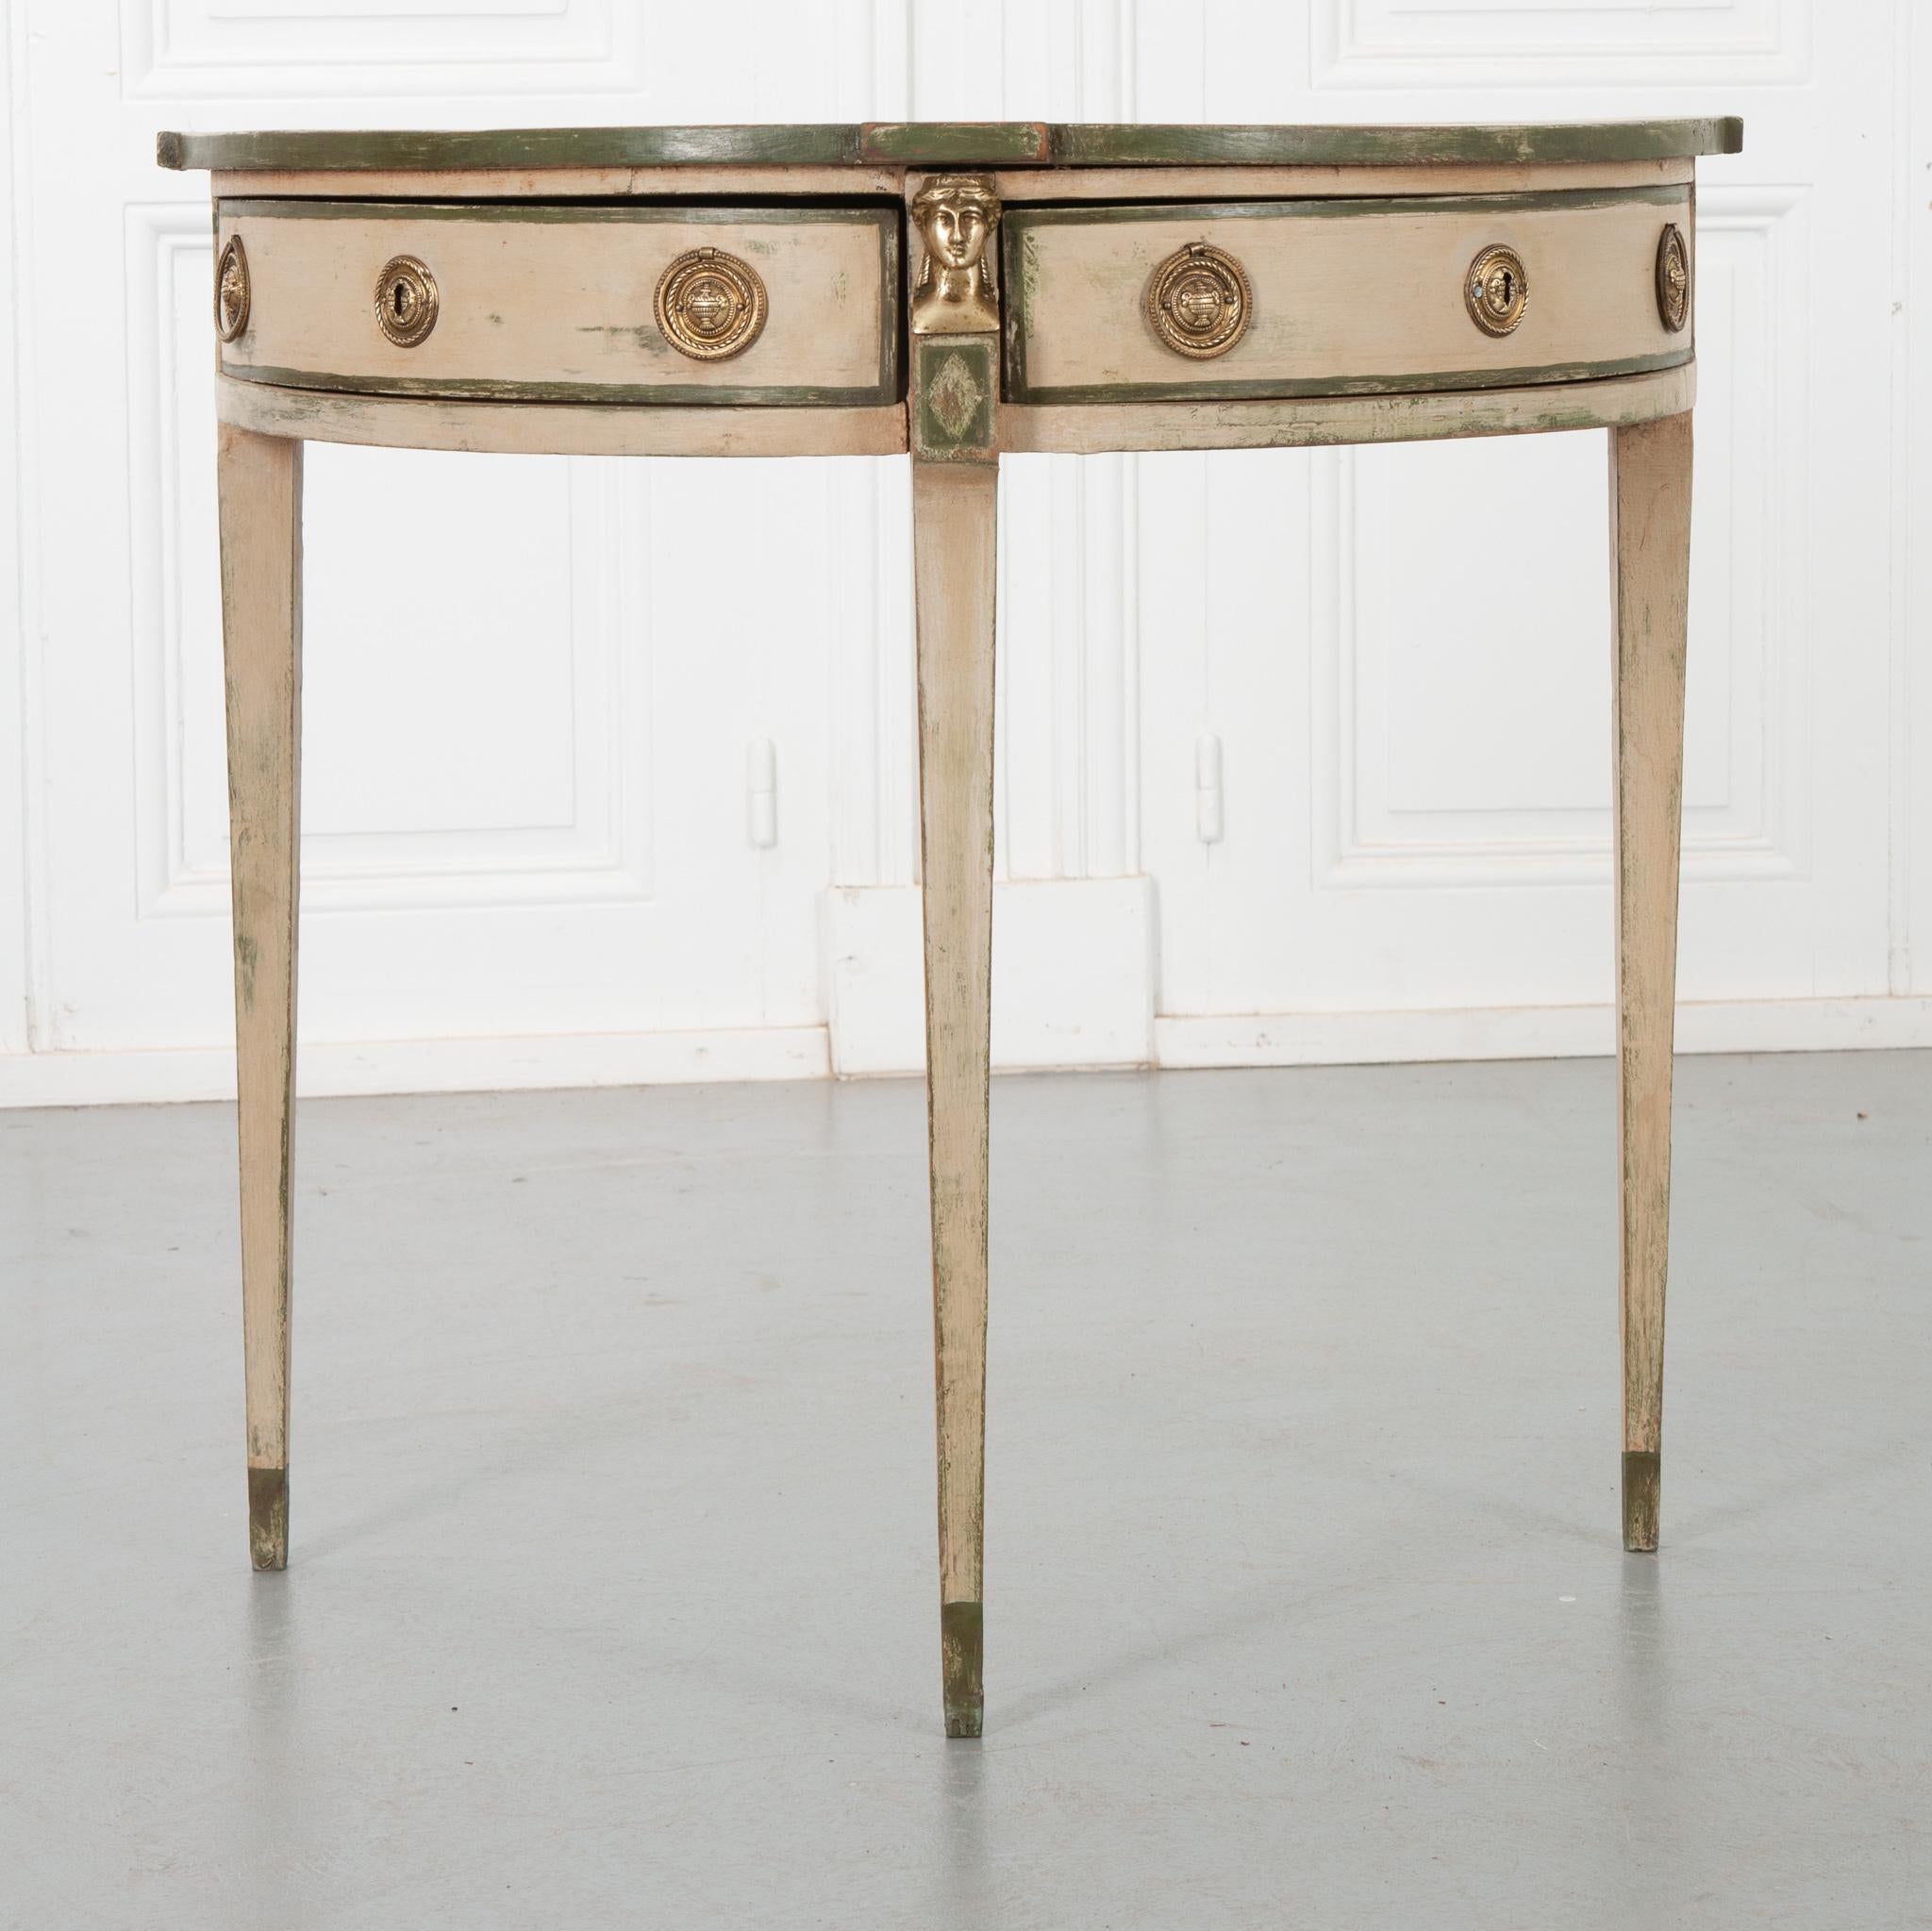 This Dutch Regency 19th century console is just as much of a work of art as it is a working table. Painted mostly cream with accents of earthy green, this is a perfect conversation piece for a small space. The shaped top is fixed to a two drawered